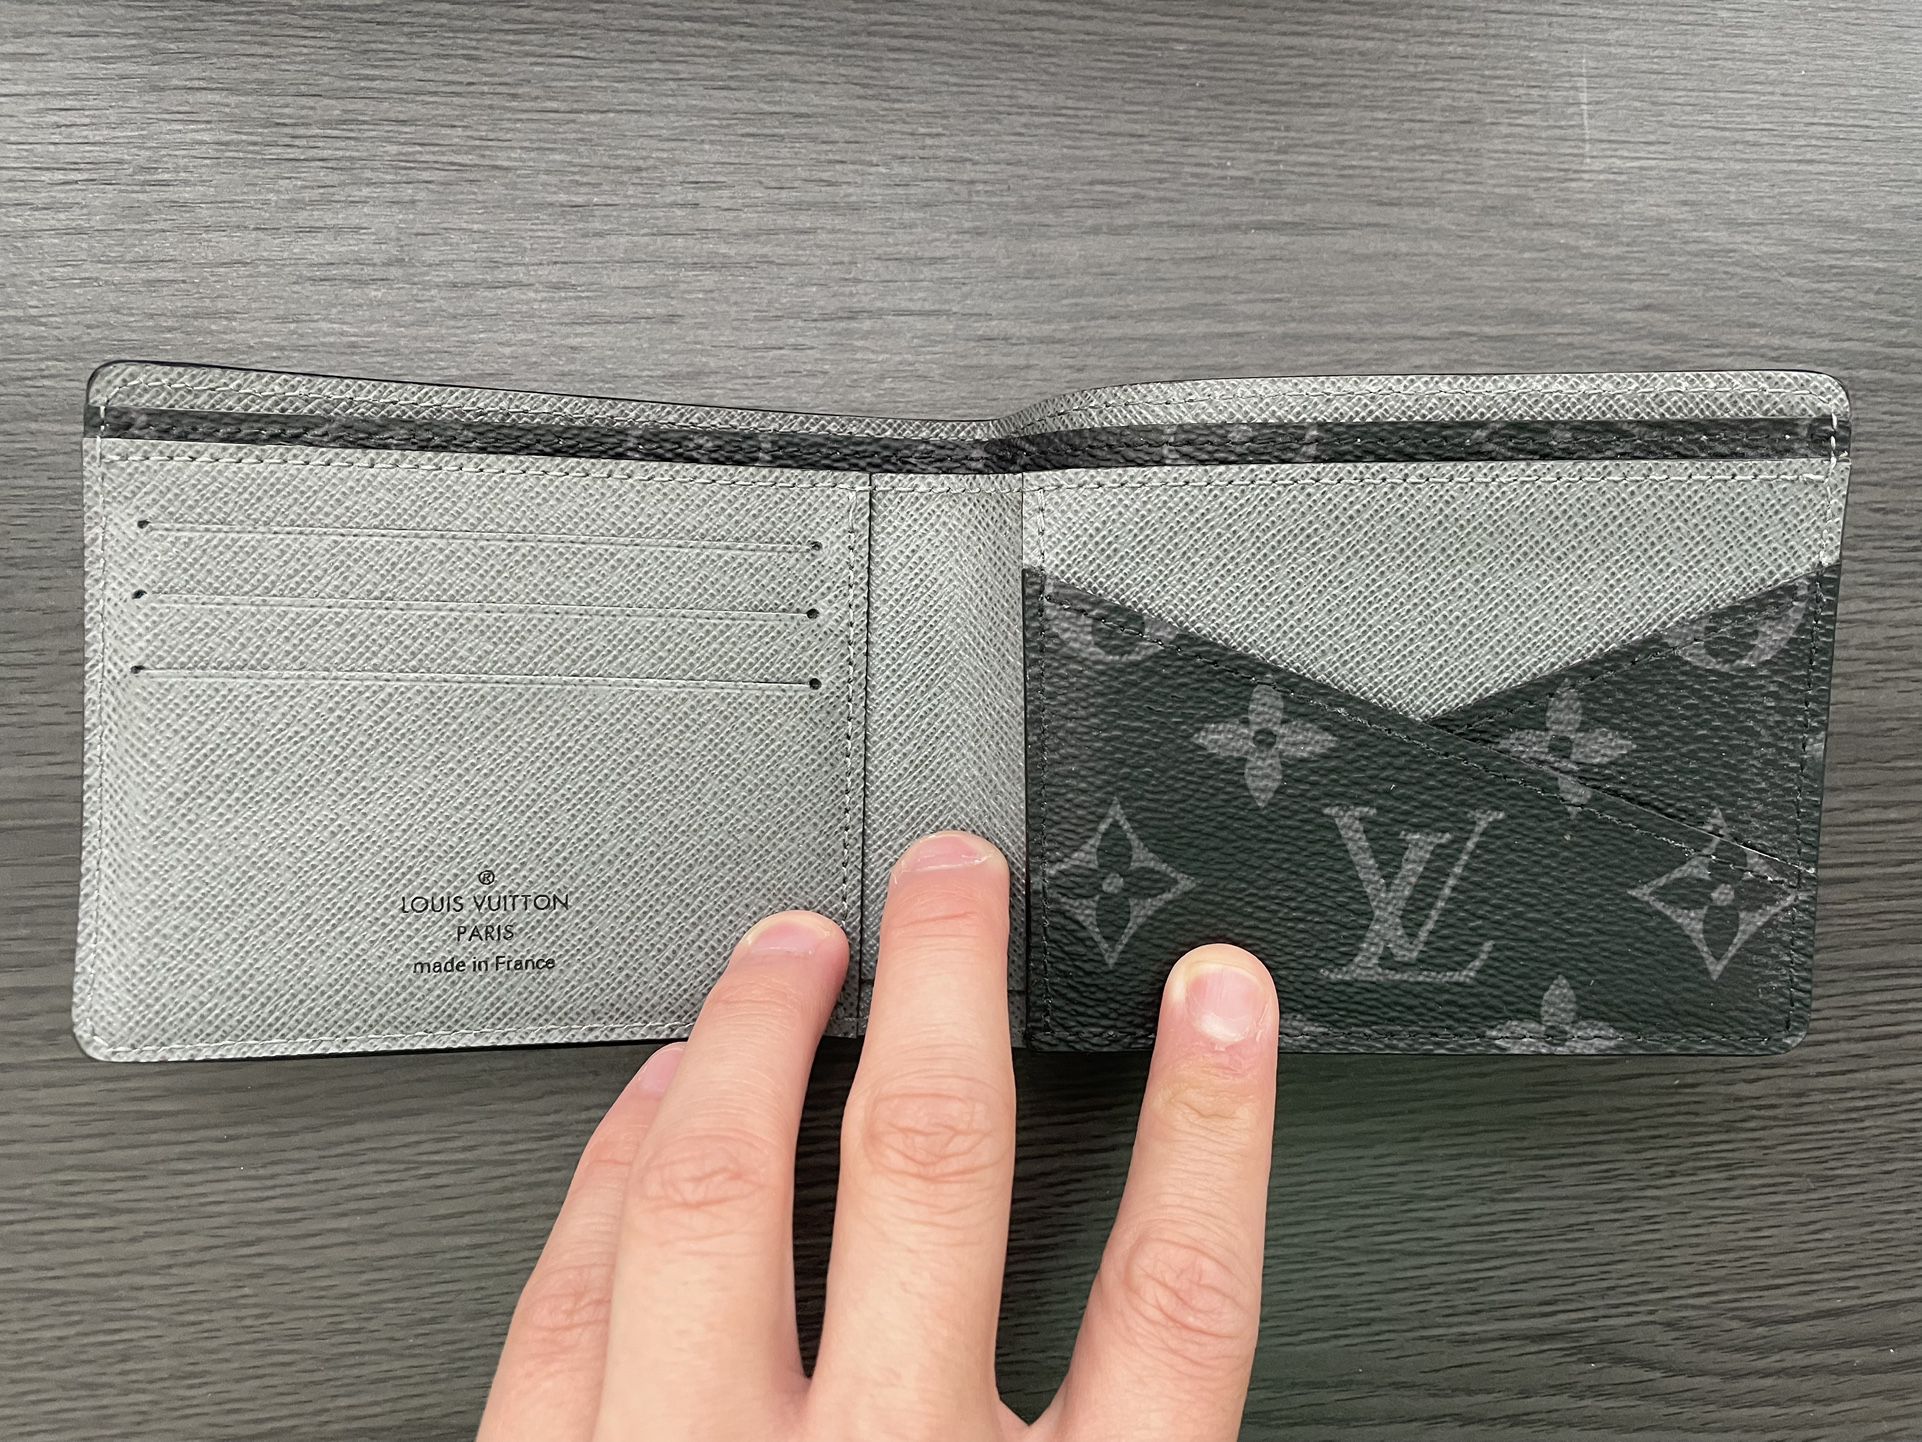 Louis Vuitton Shoulder Bag And Two Matching Wallet for Sale in Palmdale, CA  - OfferUp